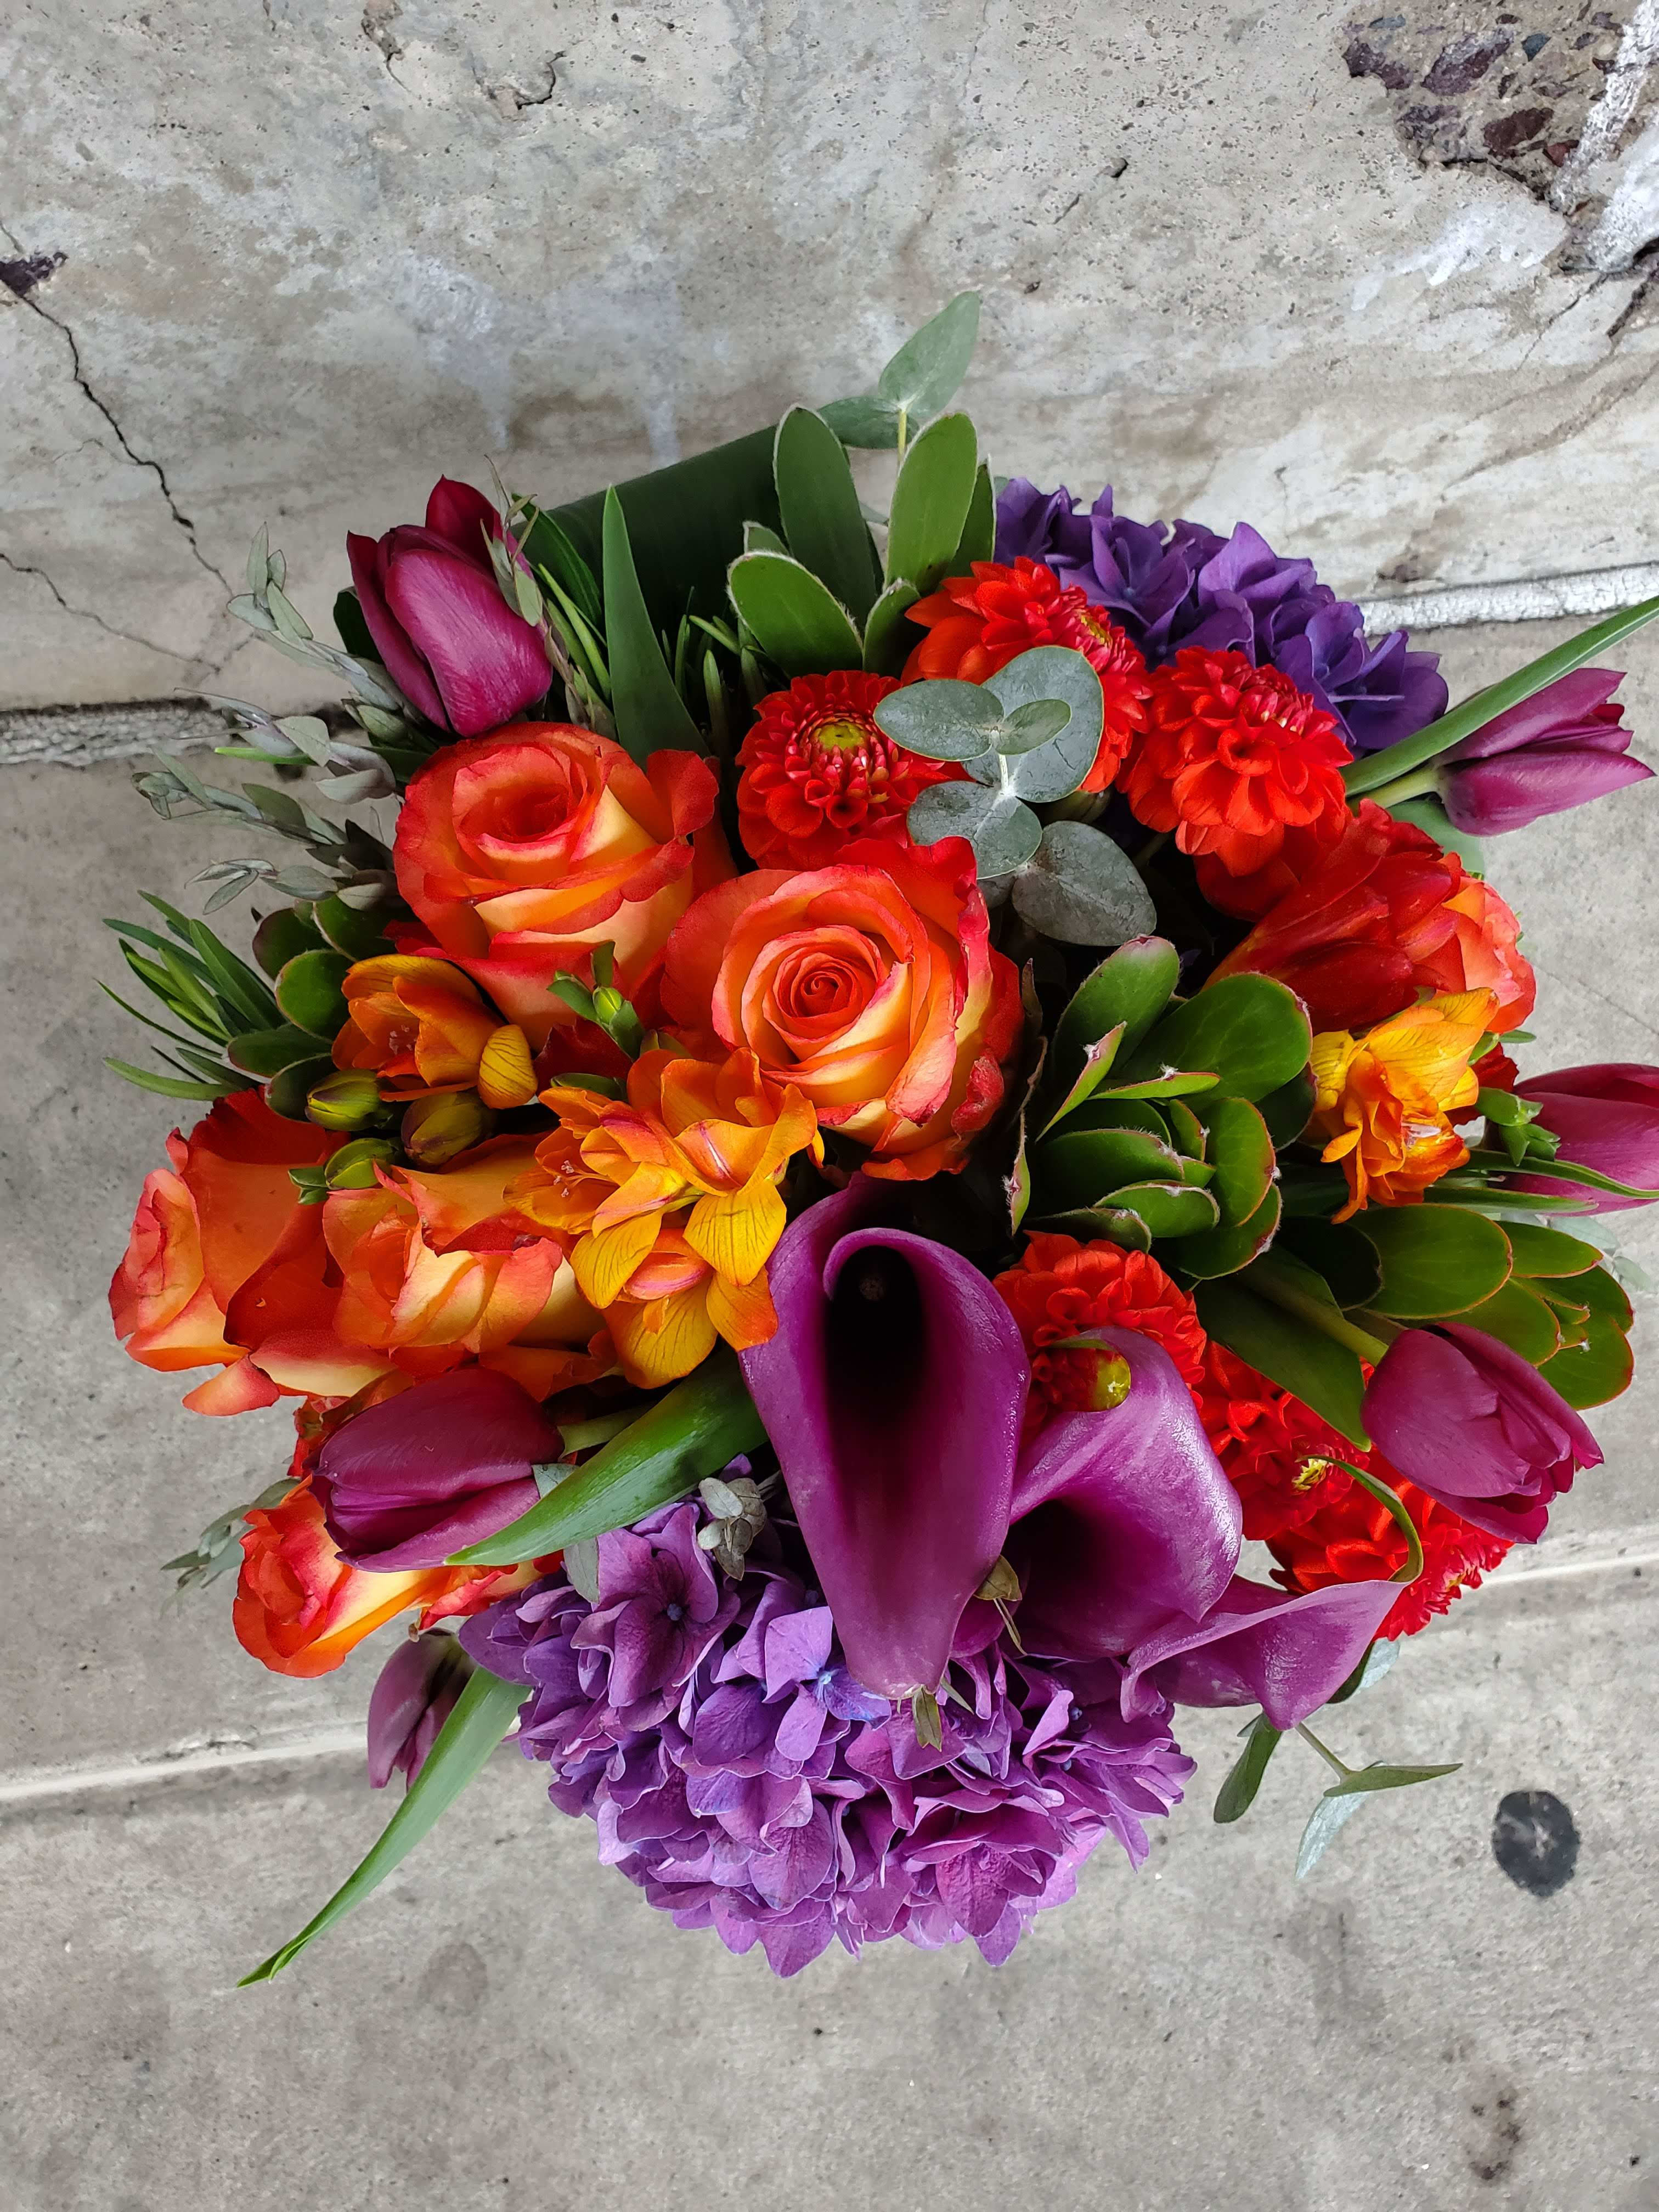 Awaking - An organic explosion of colors mix with hydrangea, purple callas, tulips and vibrant orange roses, with a light accent of organic greens in a clear vase.